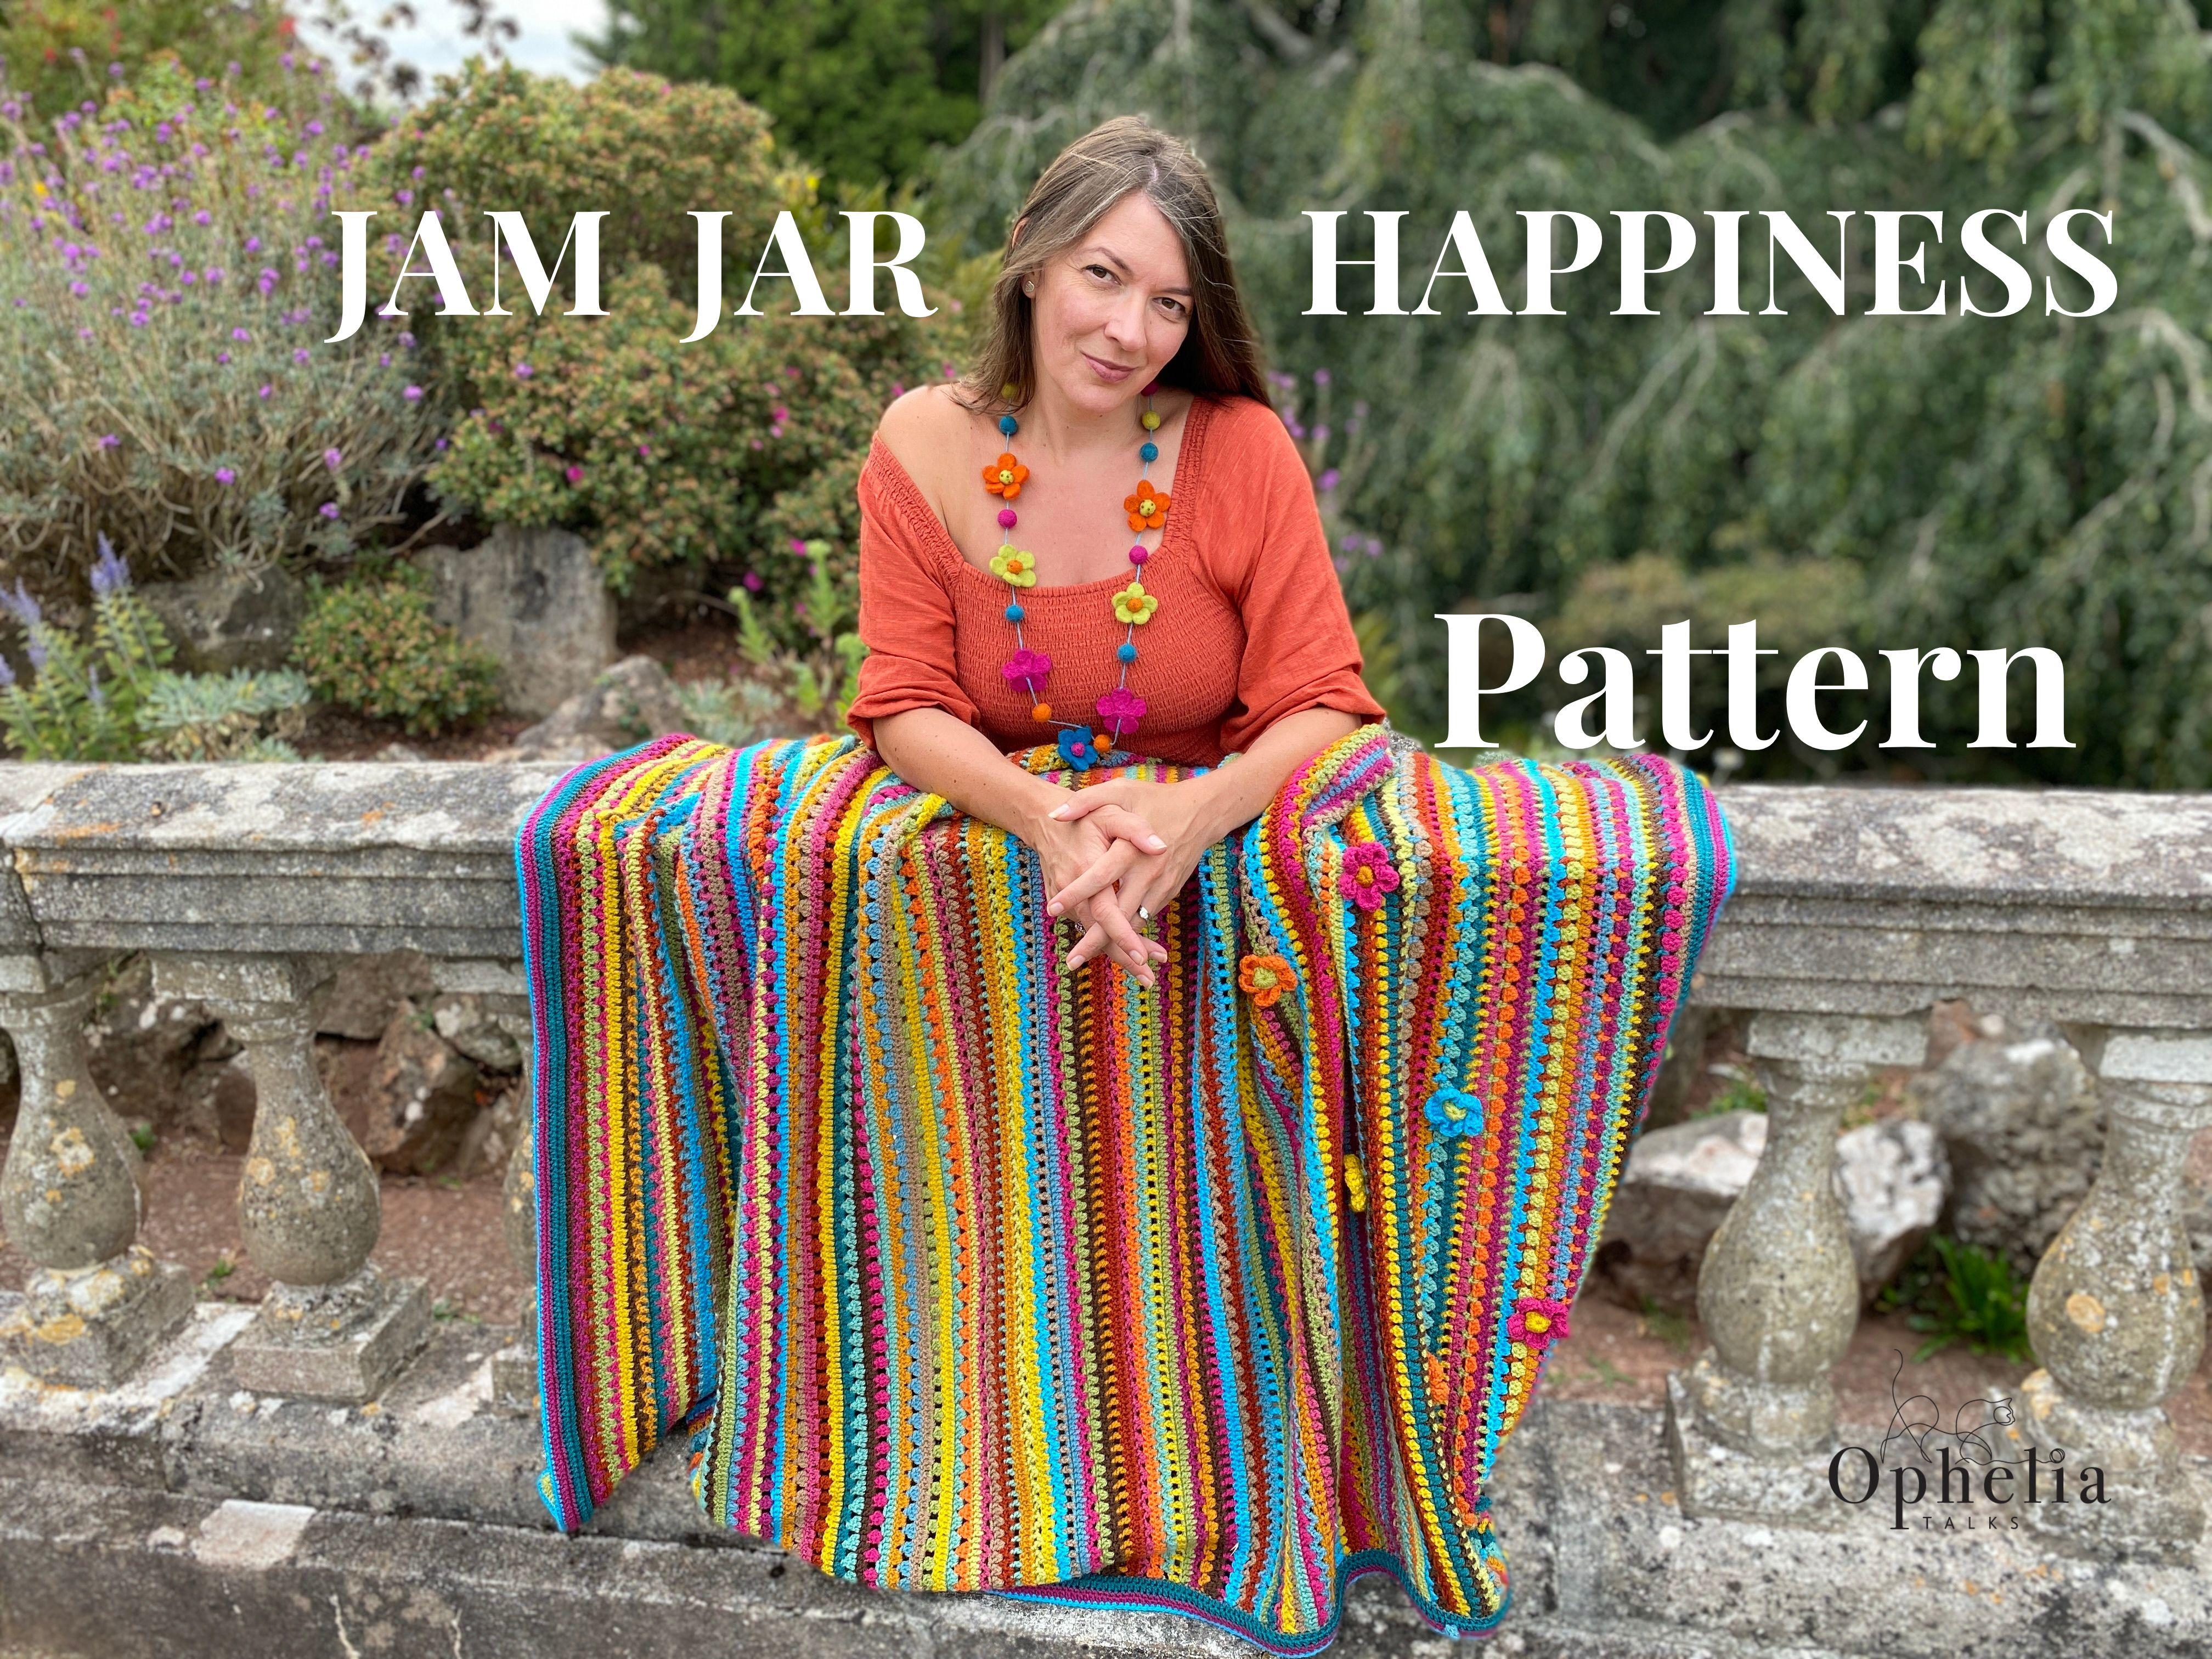 Anja with the Jam Jar Happiness Blanket